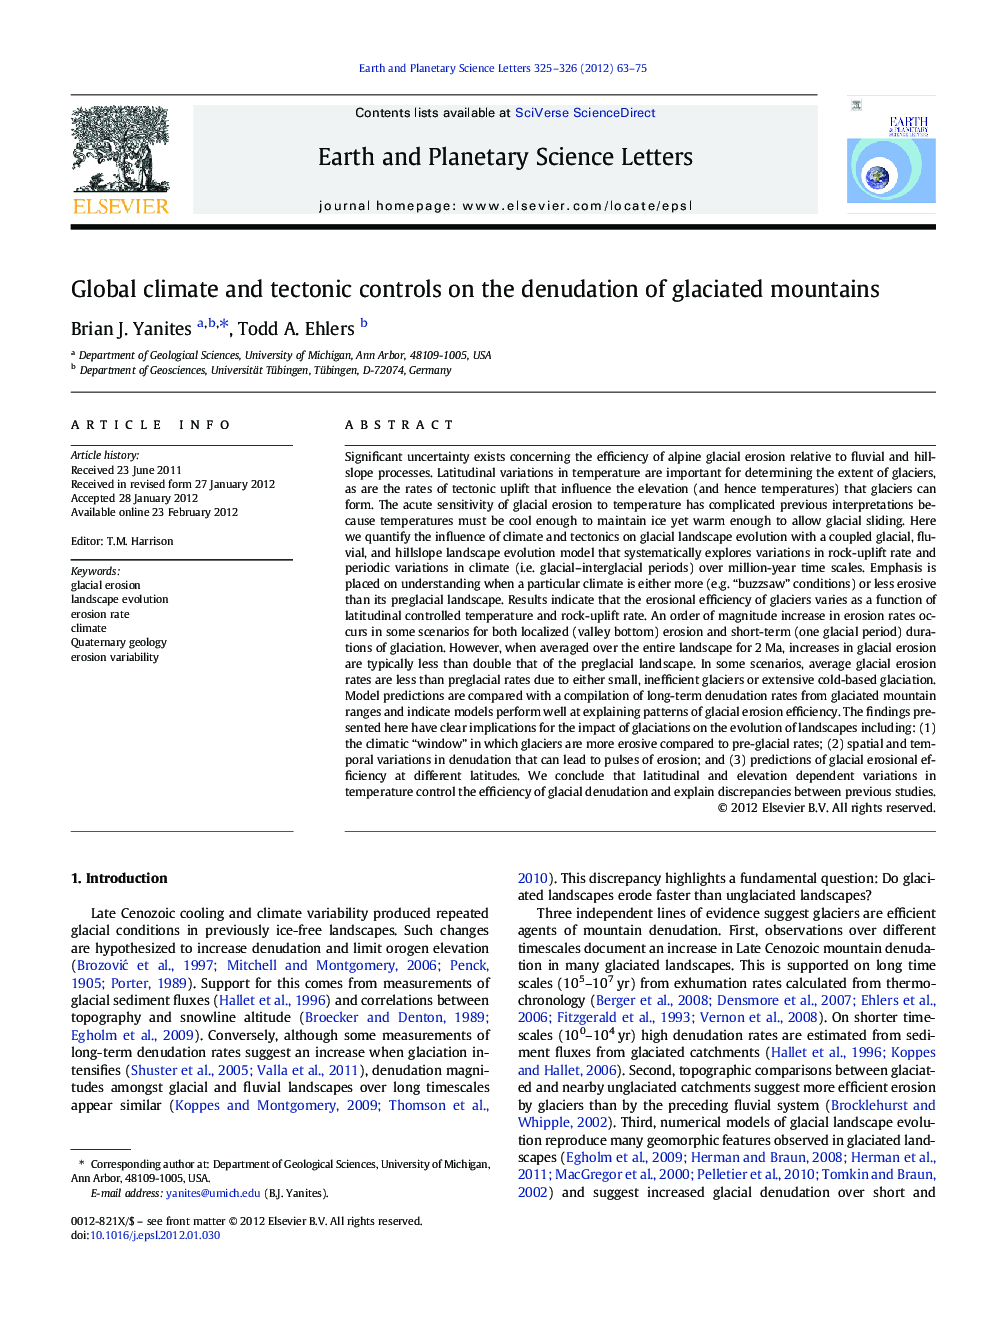 Global climate and tectonic controls on the denudation of glaciated mountains